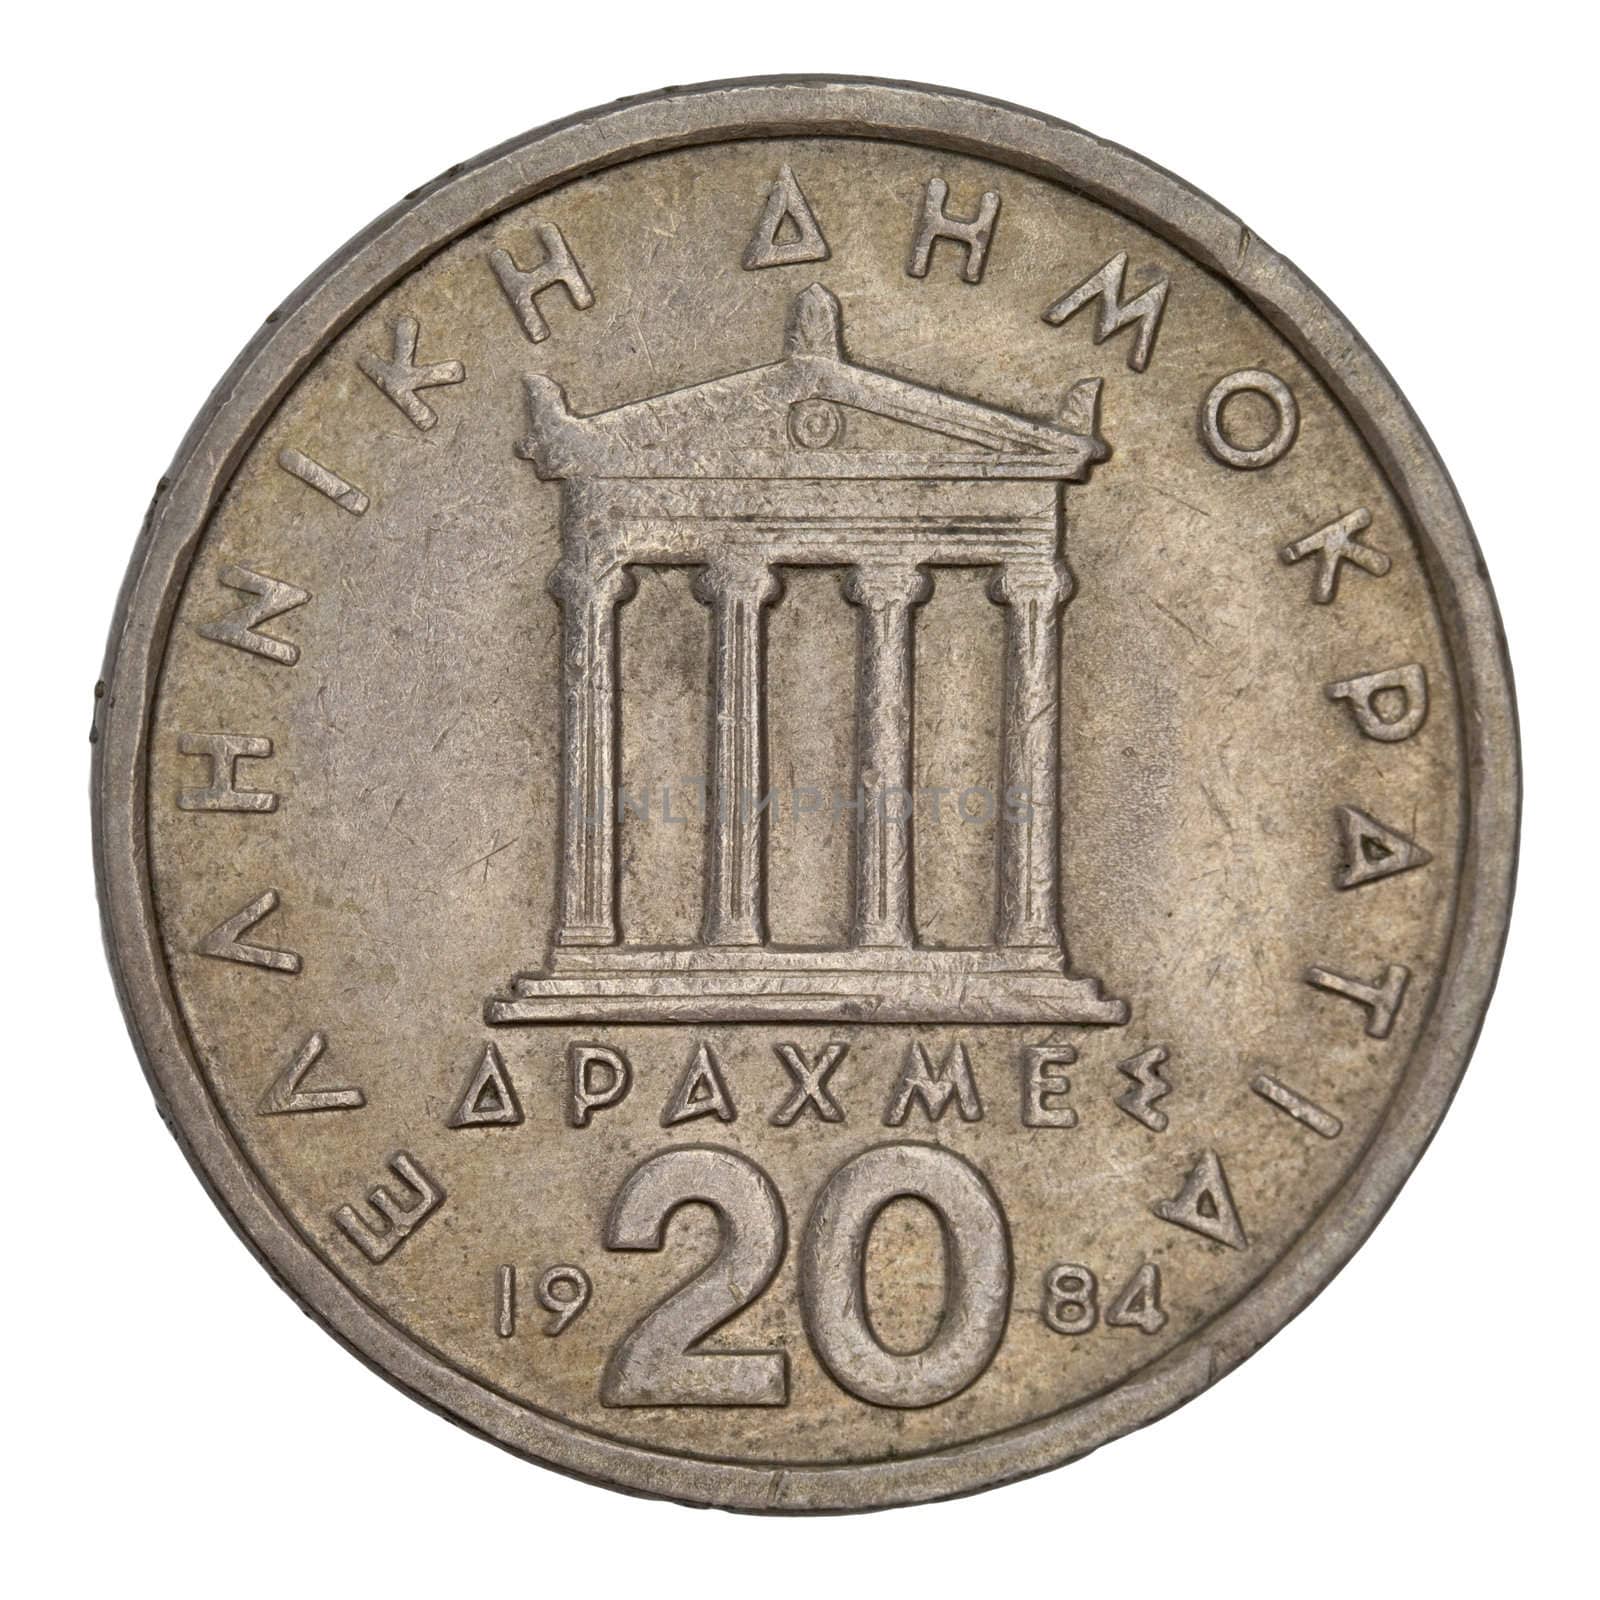 Parthenon, ancient Greek temple, schematically represented on old circulated 20 drachma coin from 1984 (copper with allumnium and nickel)